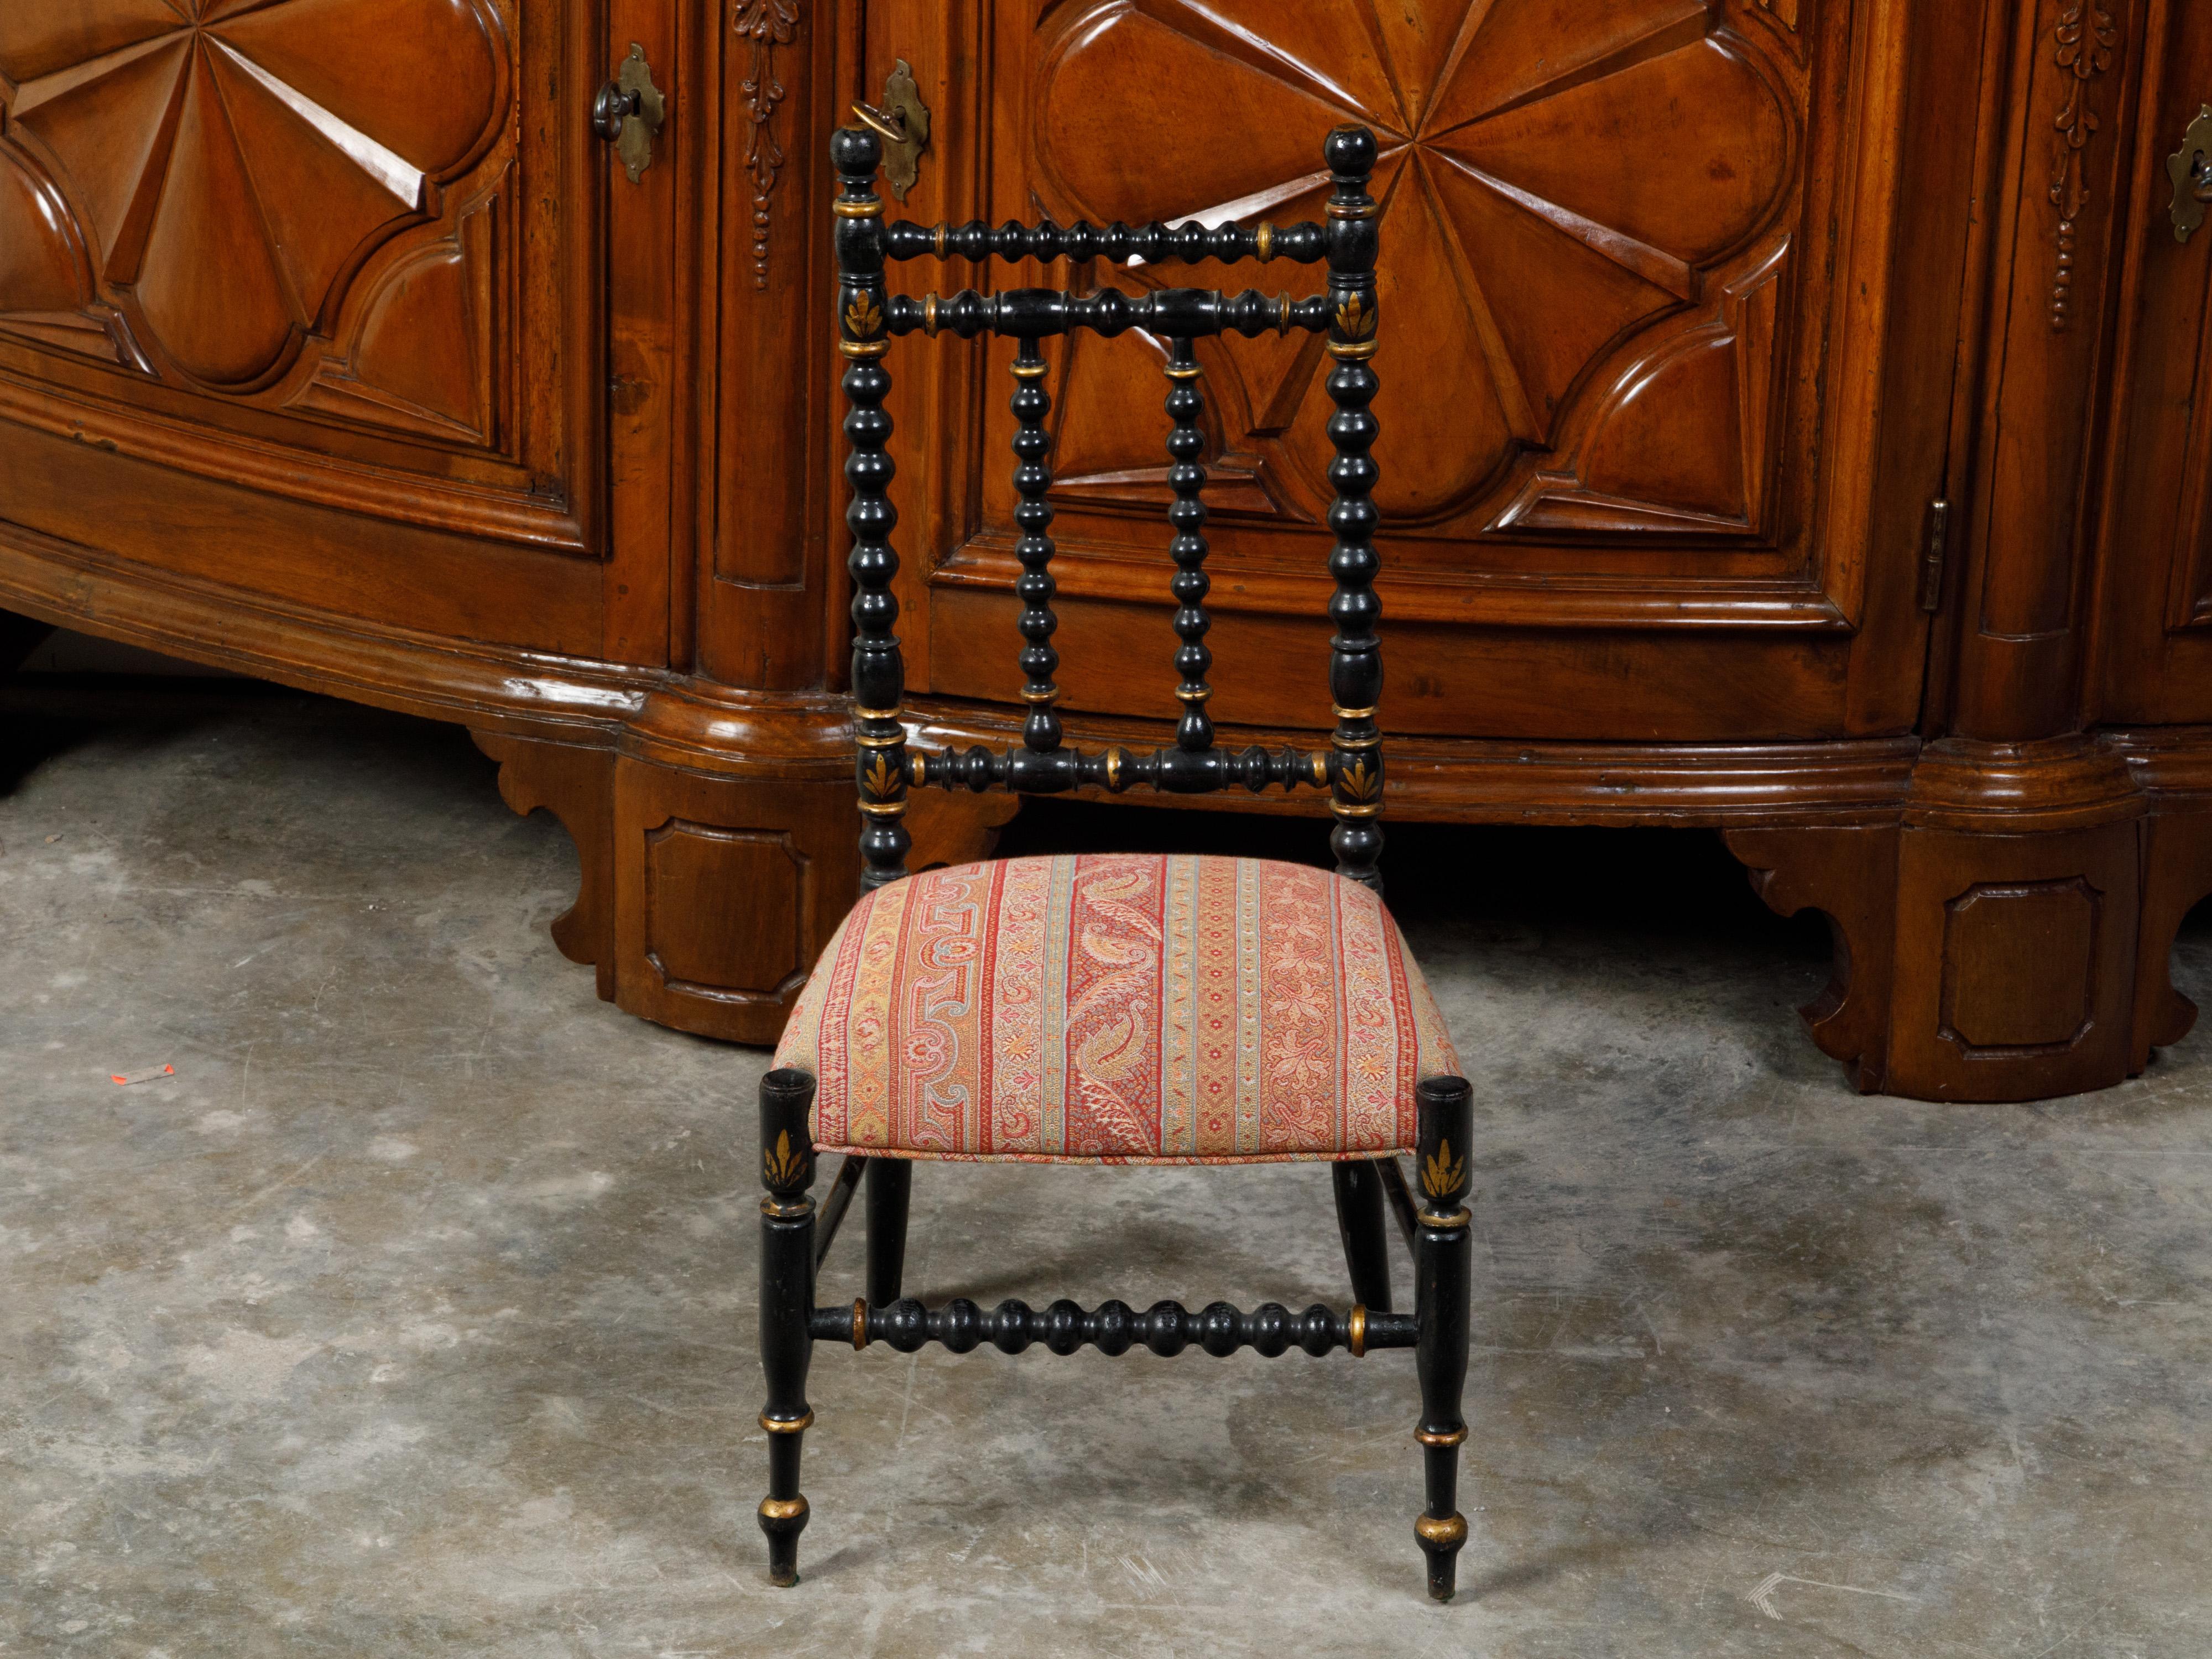 An English ebonized wood bobbin child's chair from the 19th century, with woven upholstery. Created in England during the 19th century, this wooden child's chair features an ebonized bobbin structure accented with gilt motifs. Showcasing a seat